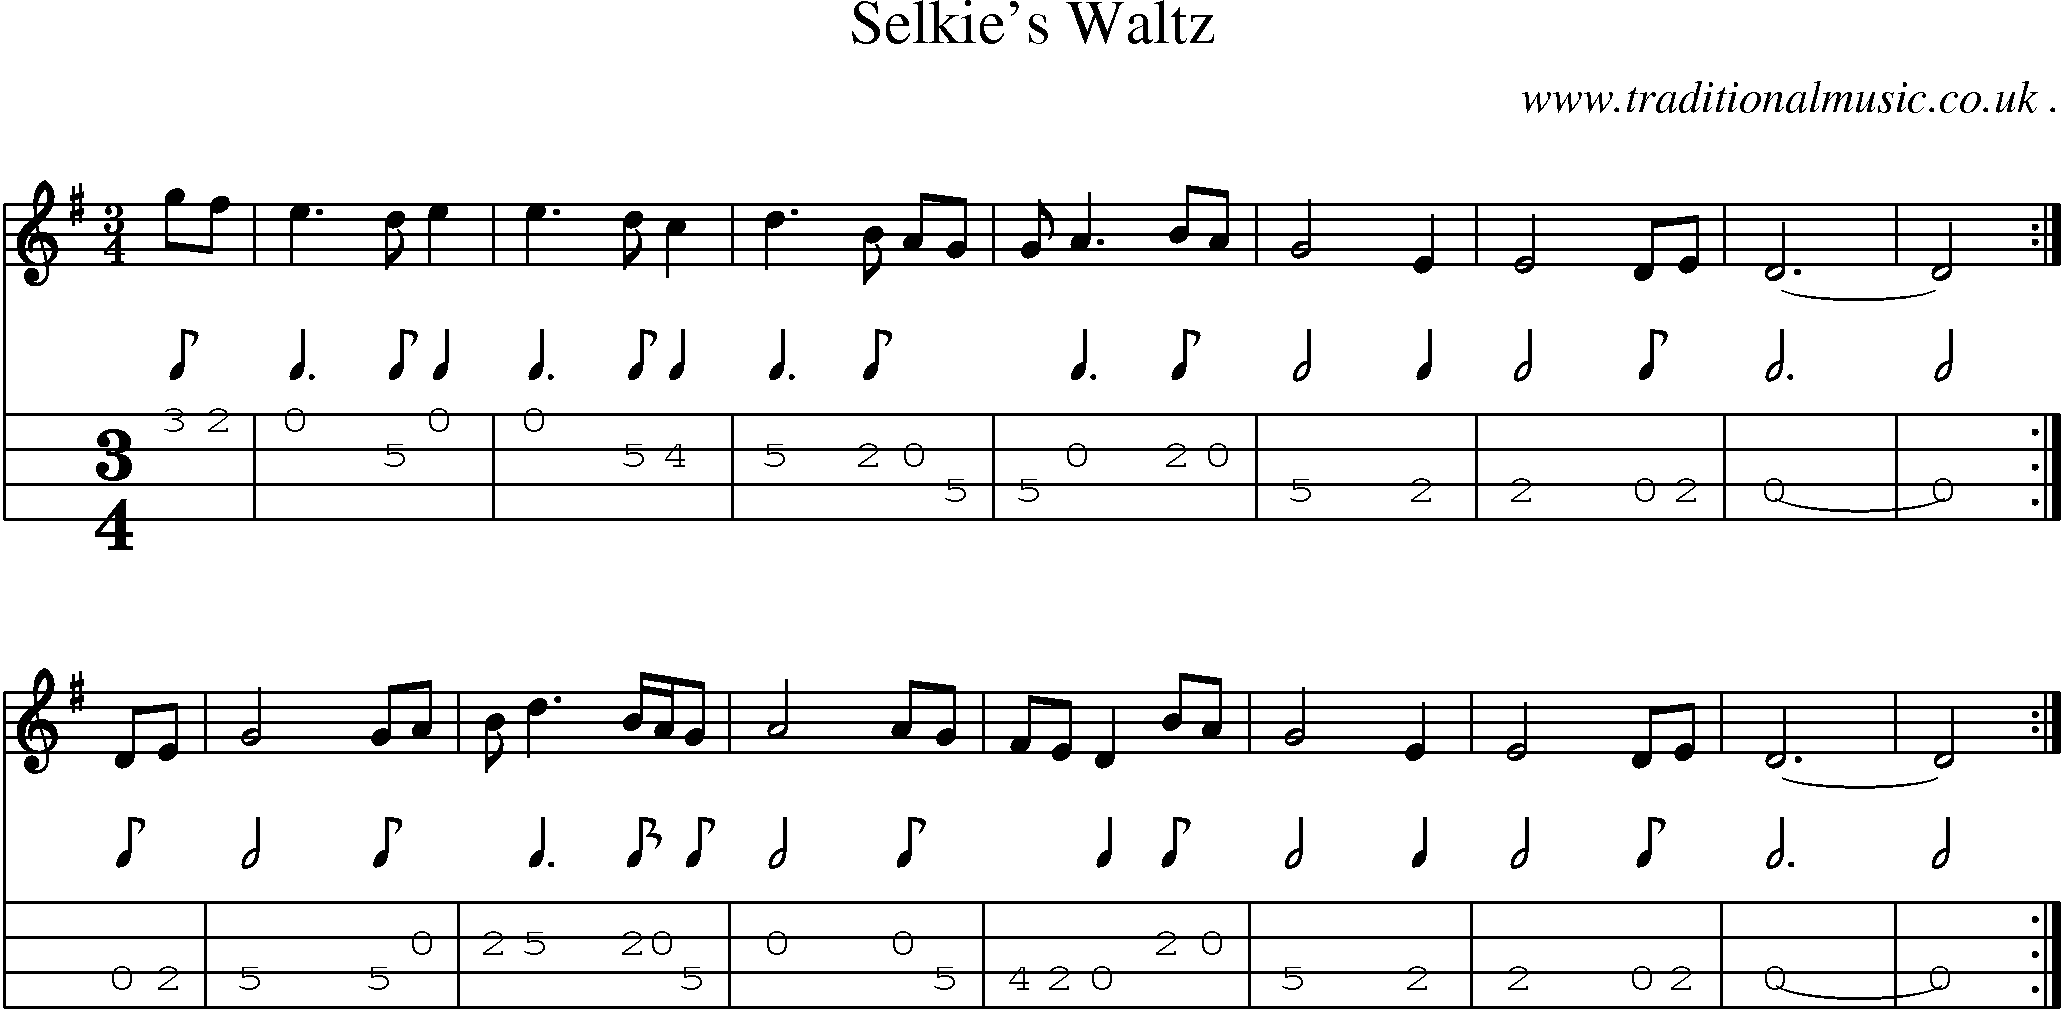 Sheet-music  score, Chords and Mandolin Tabs for Selkies Waltz